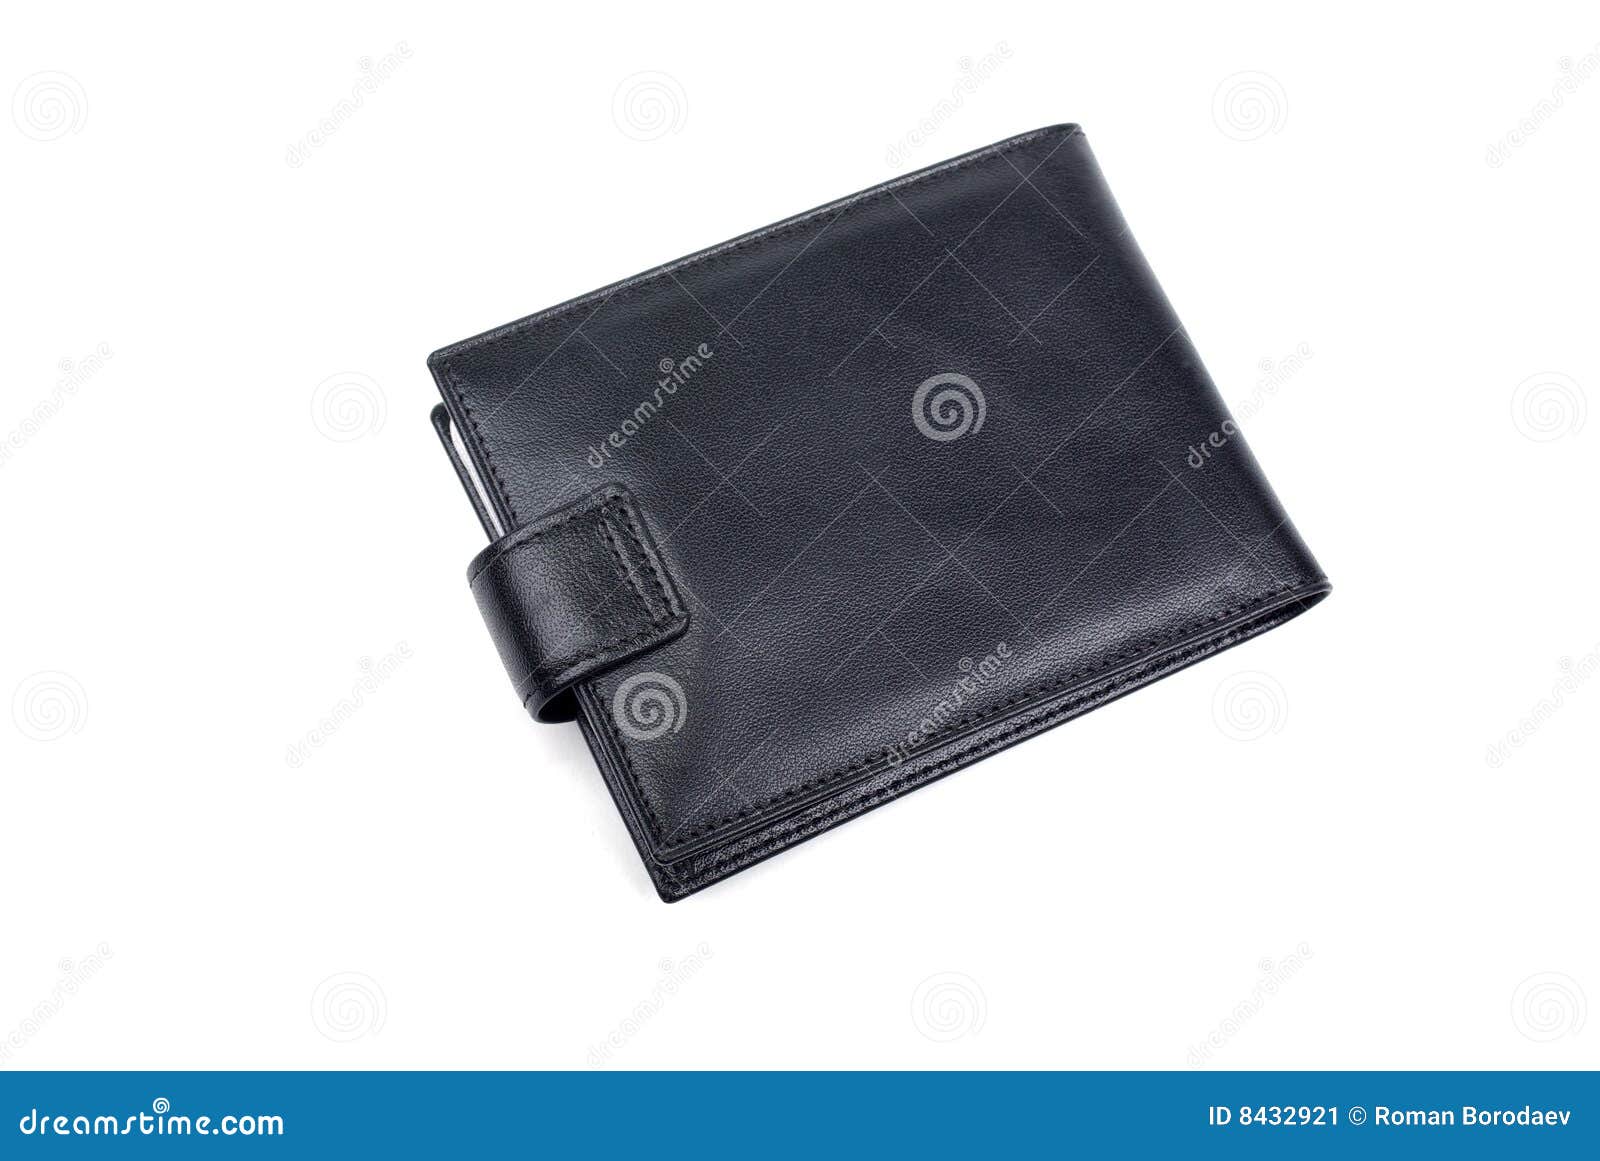 Black Leather Wallet Purse Isolated on White Background Money Credit ...